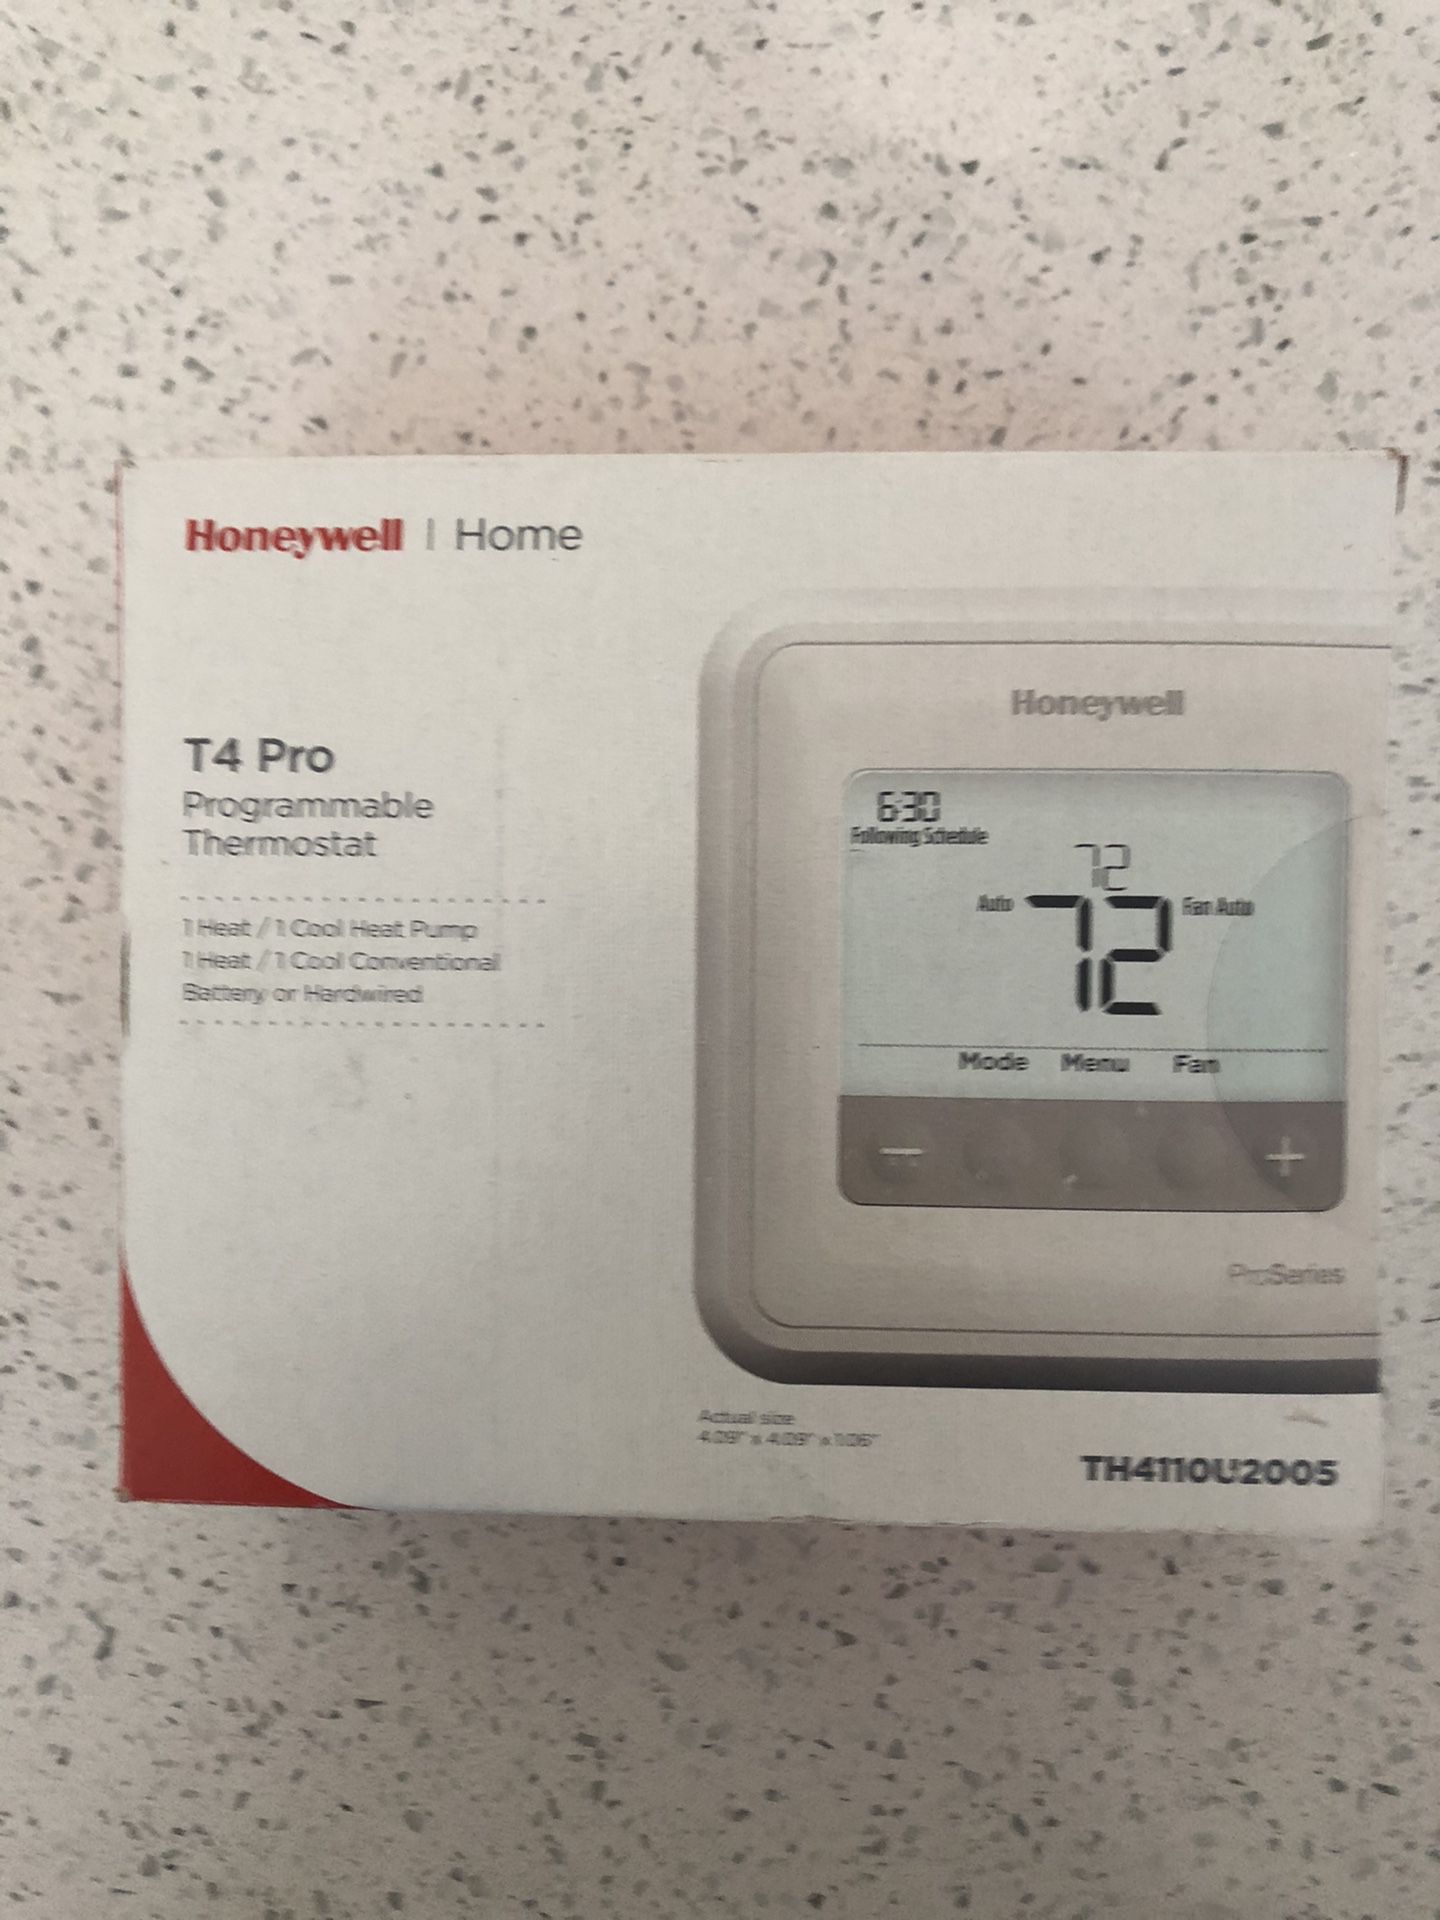 Honeywell Home T4 Pro Thermostat